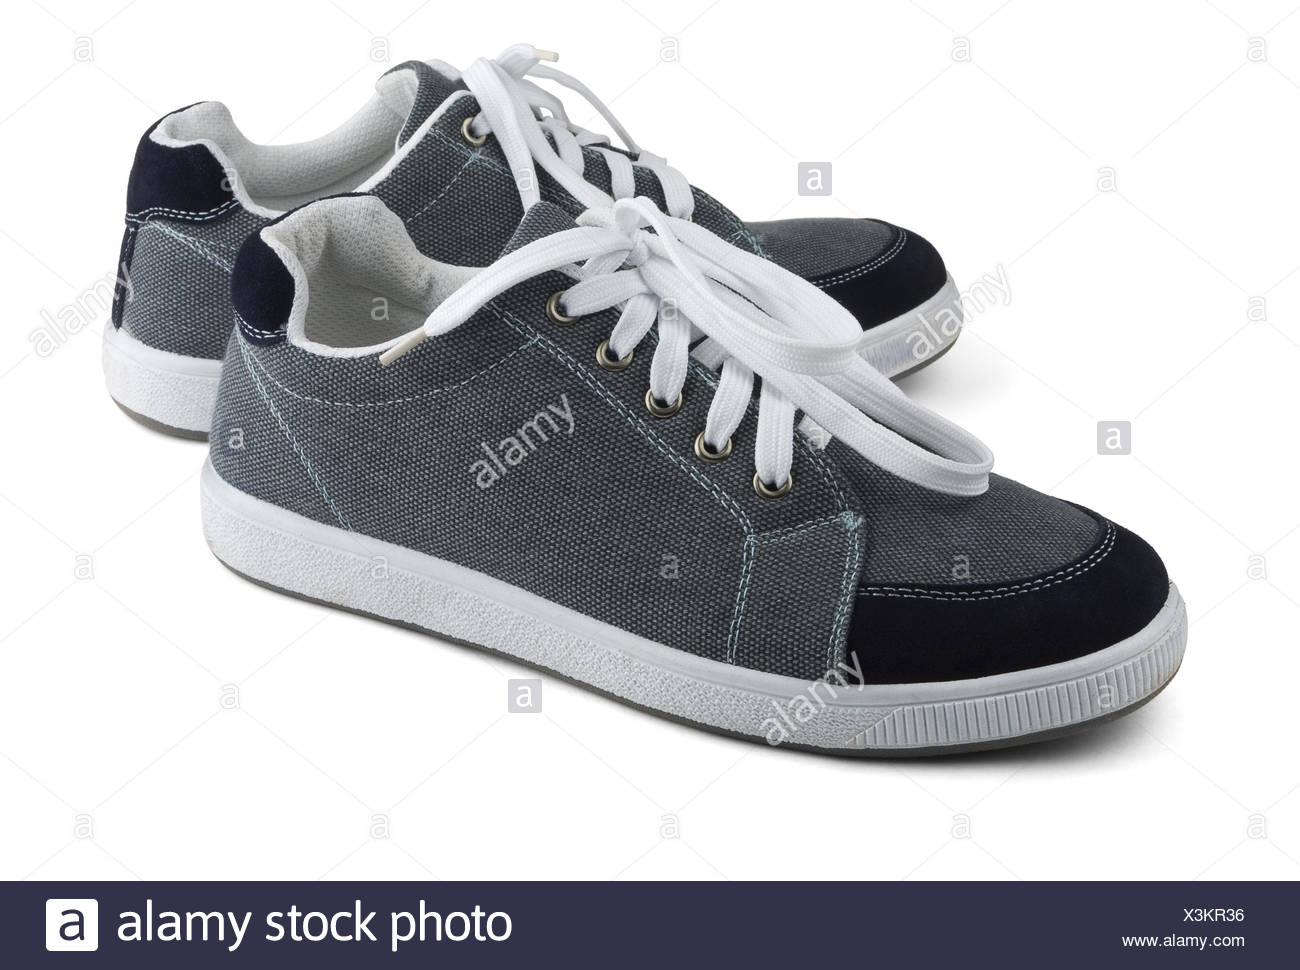 Grey Sneakers Stock Photos & Grey Sneakers Stock Images - Alamy